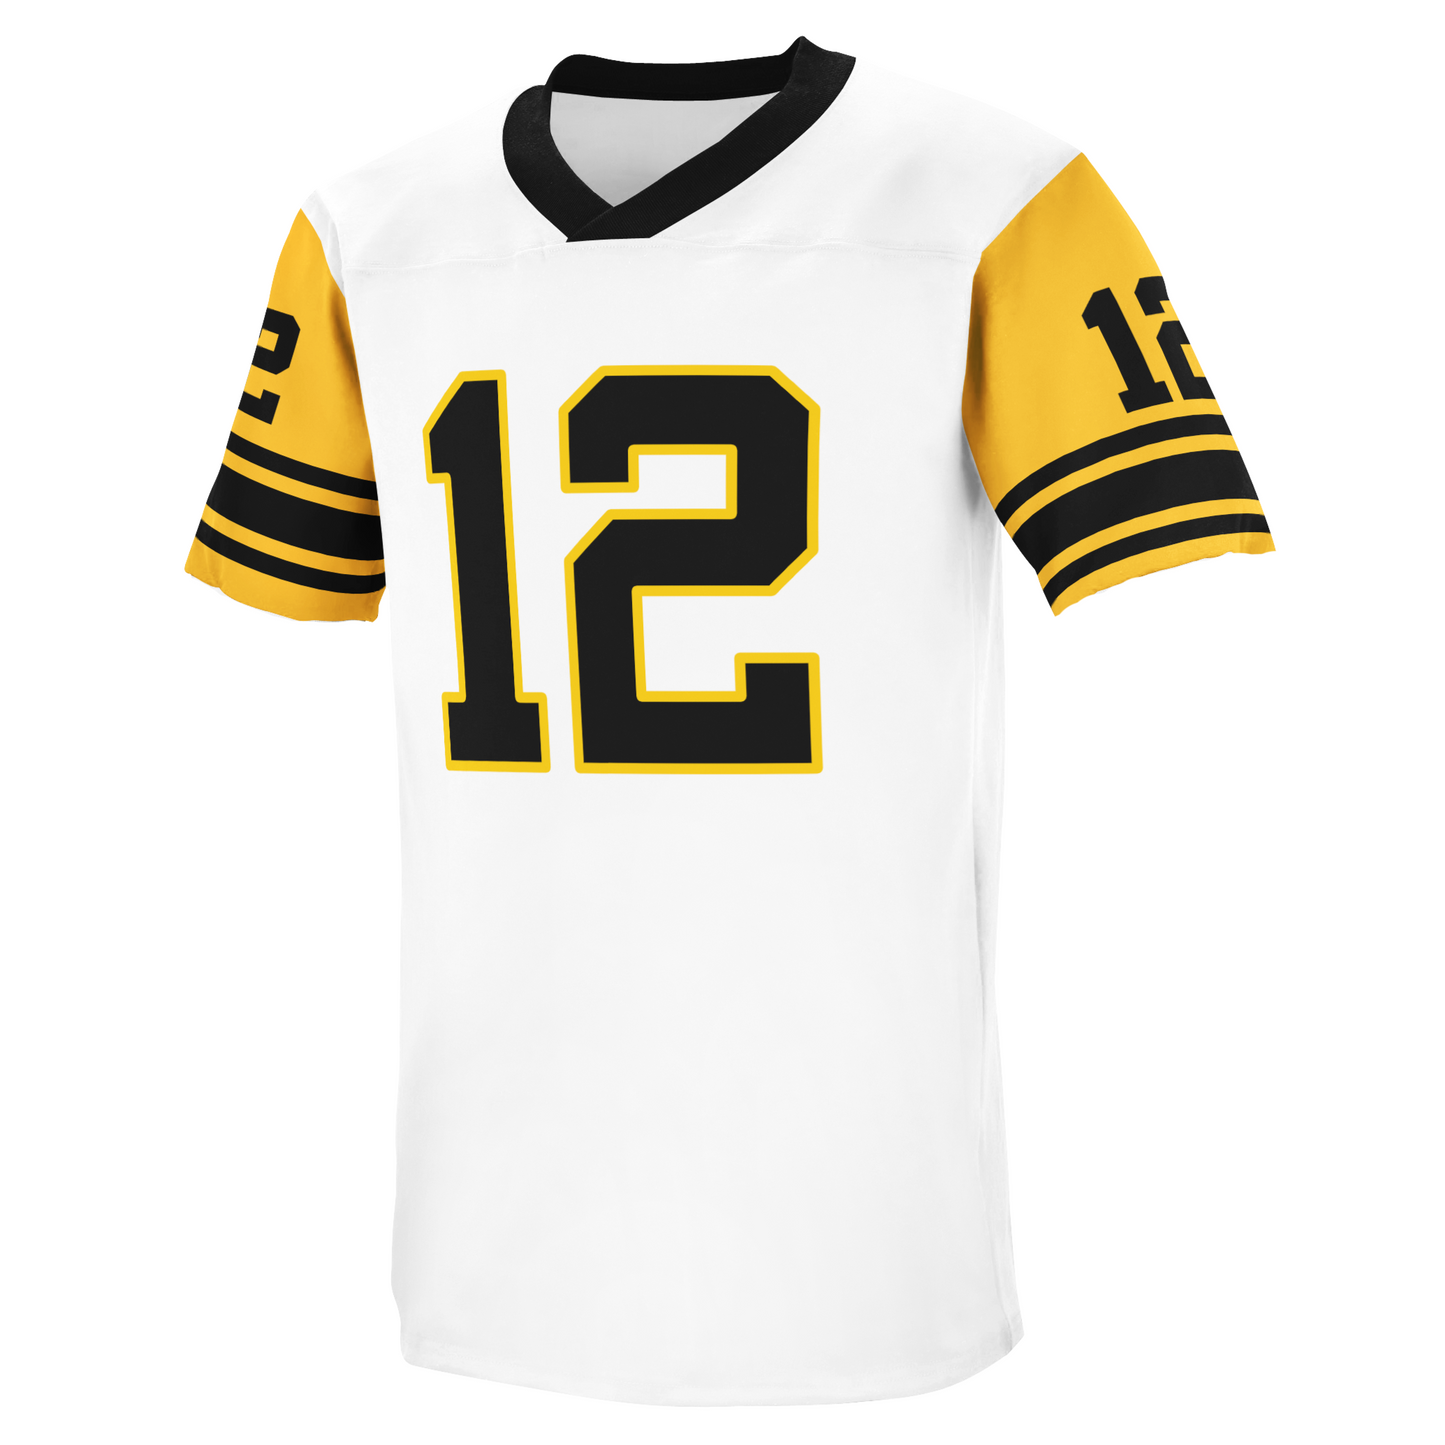 1962 pittsburgh steelers jersey